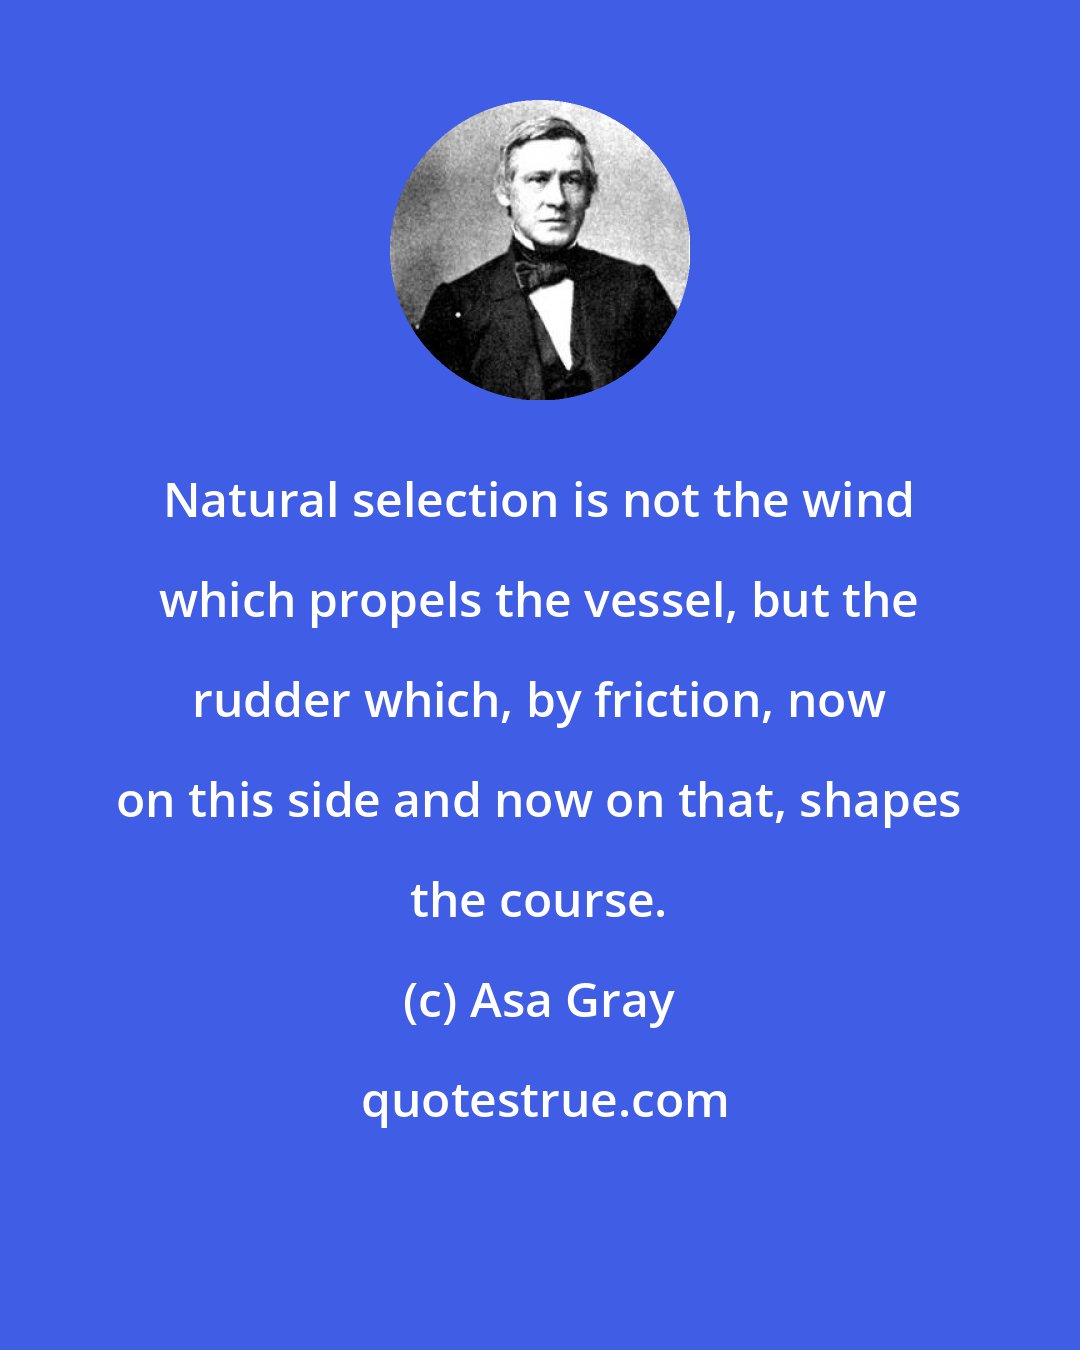 Asa Gray: Natural selection is not the wind which propels the vessel, but the rudder which, by friction, now on this side and now on that, shapes the course.